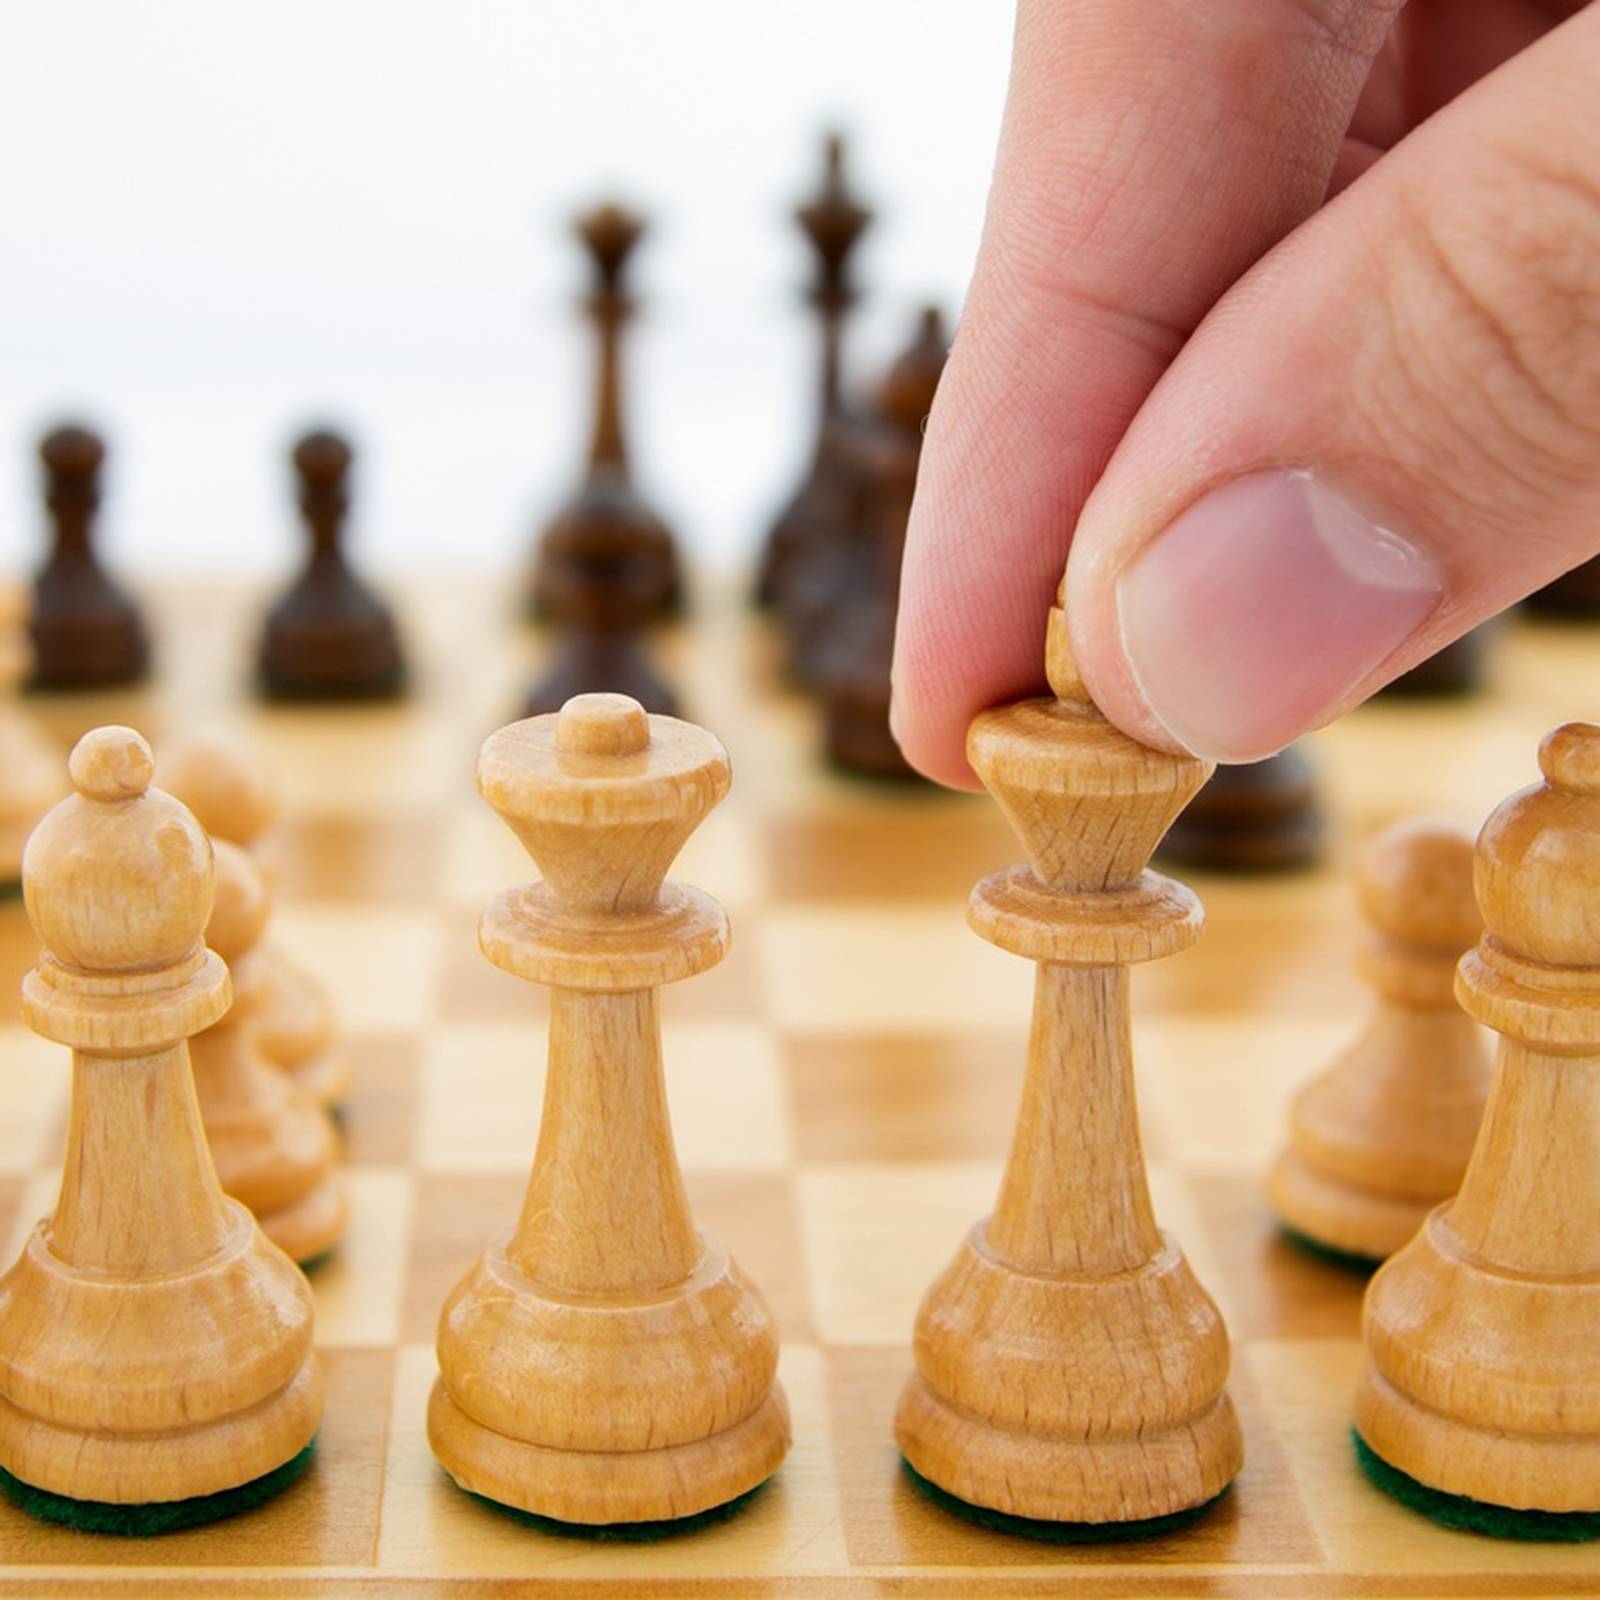 Is playing chess forbidden in Islam? - Quora